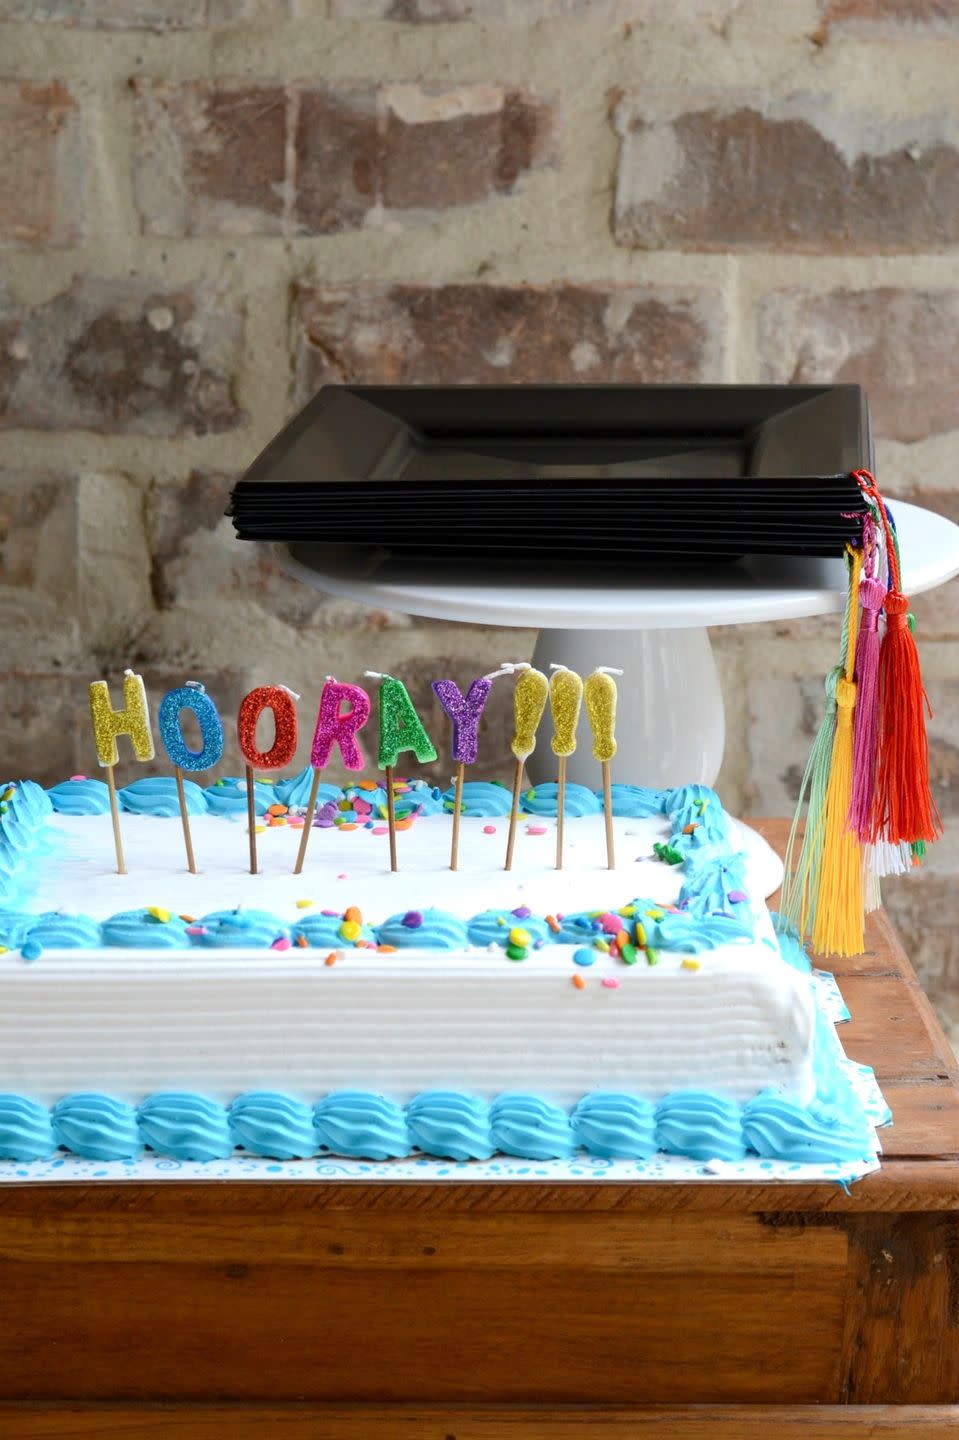 graduation cake with plates in the shape of motarboards and tassels